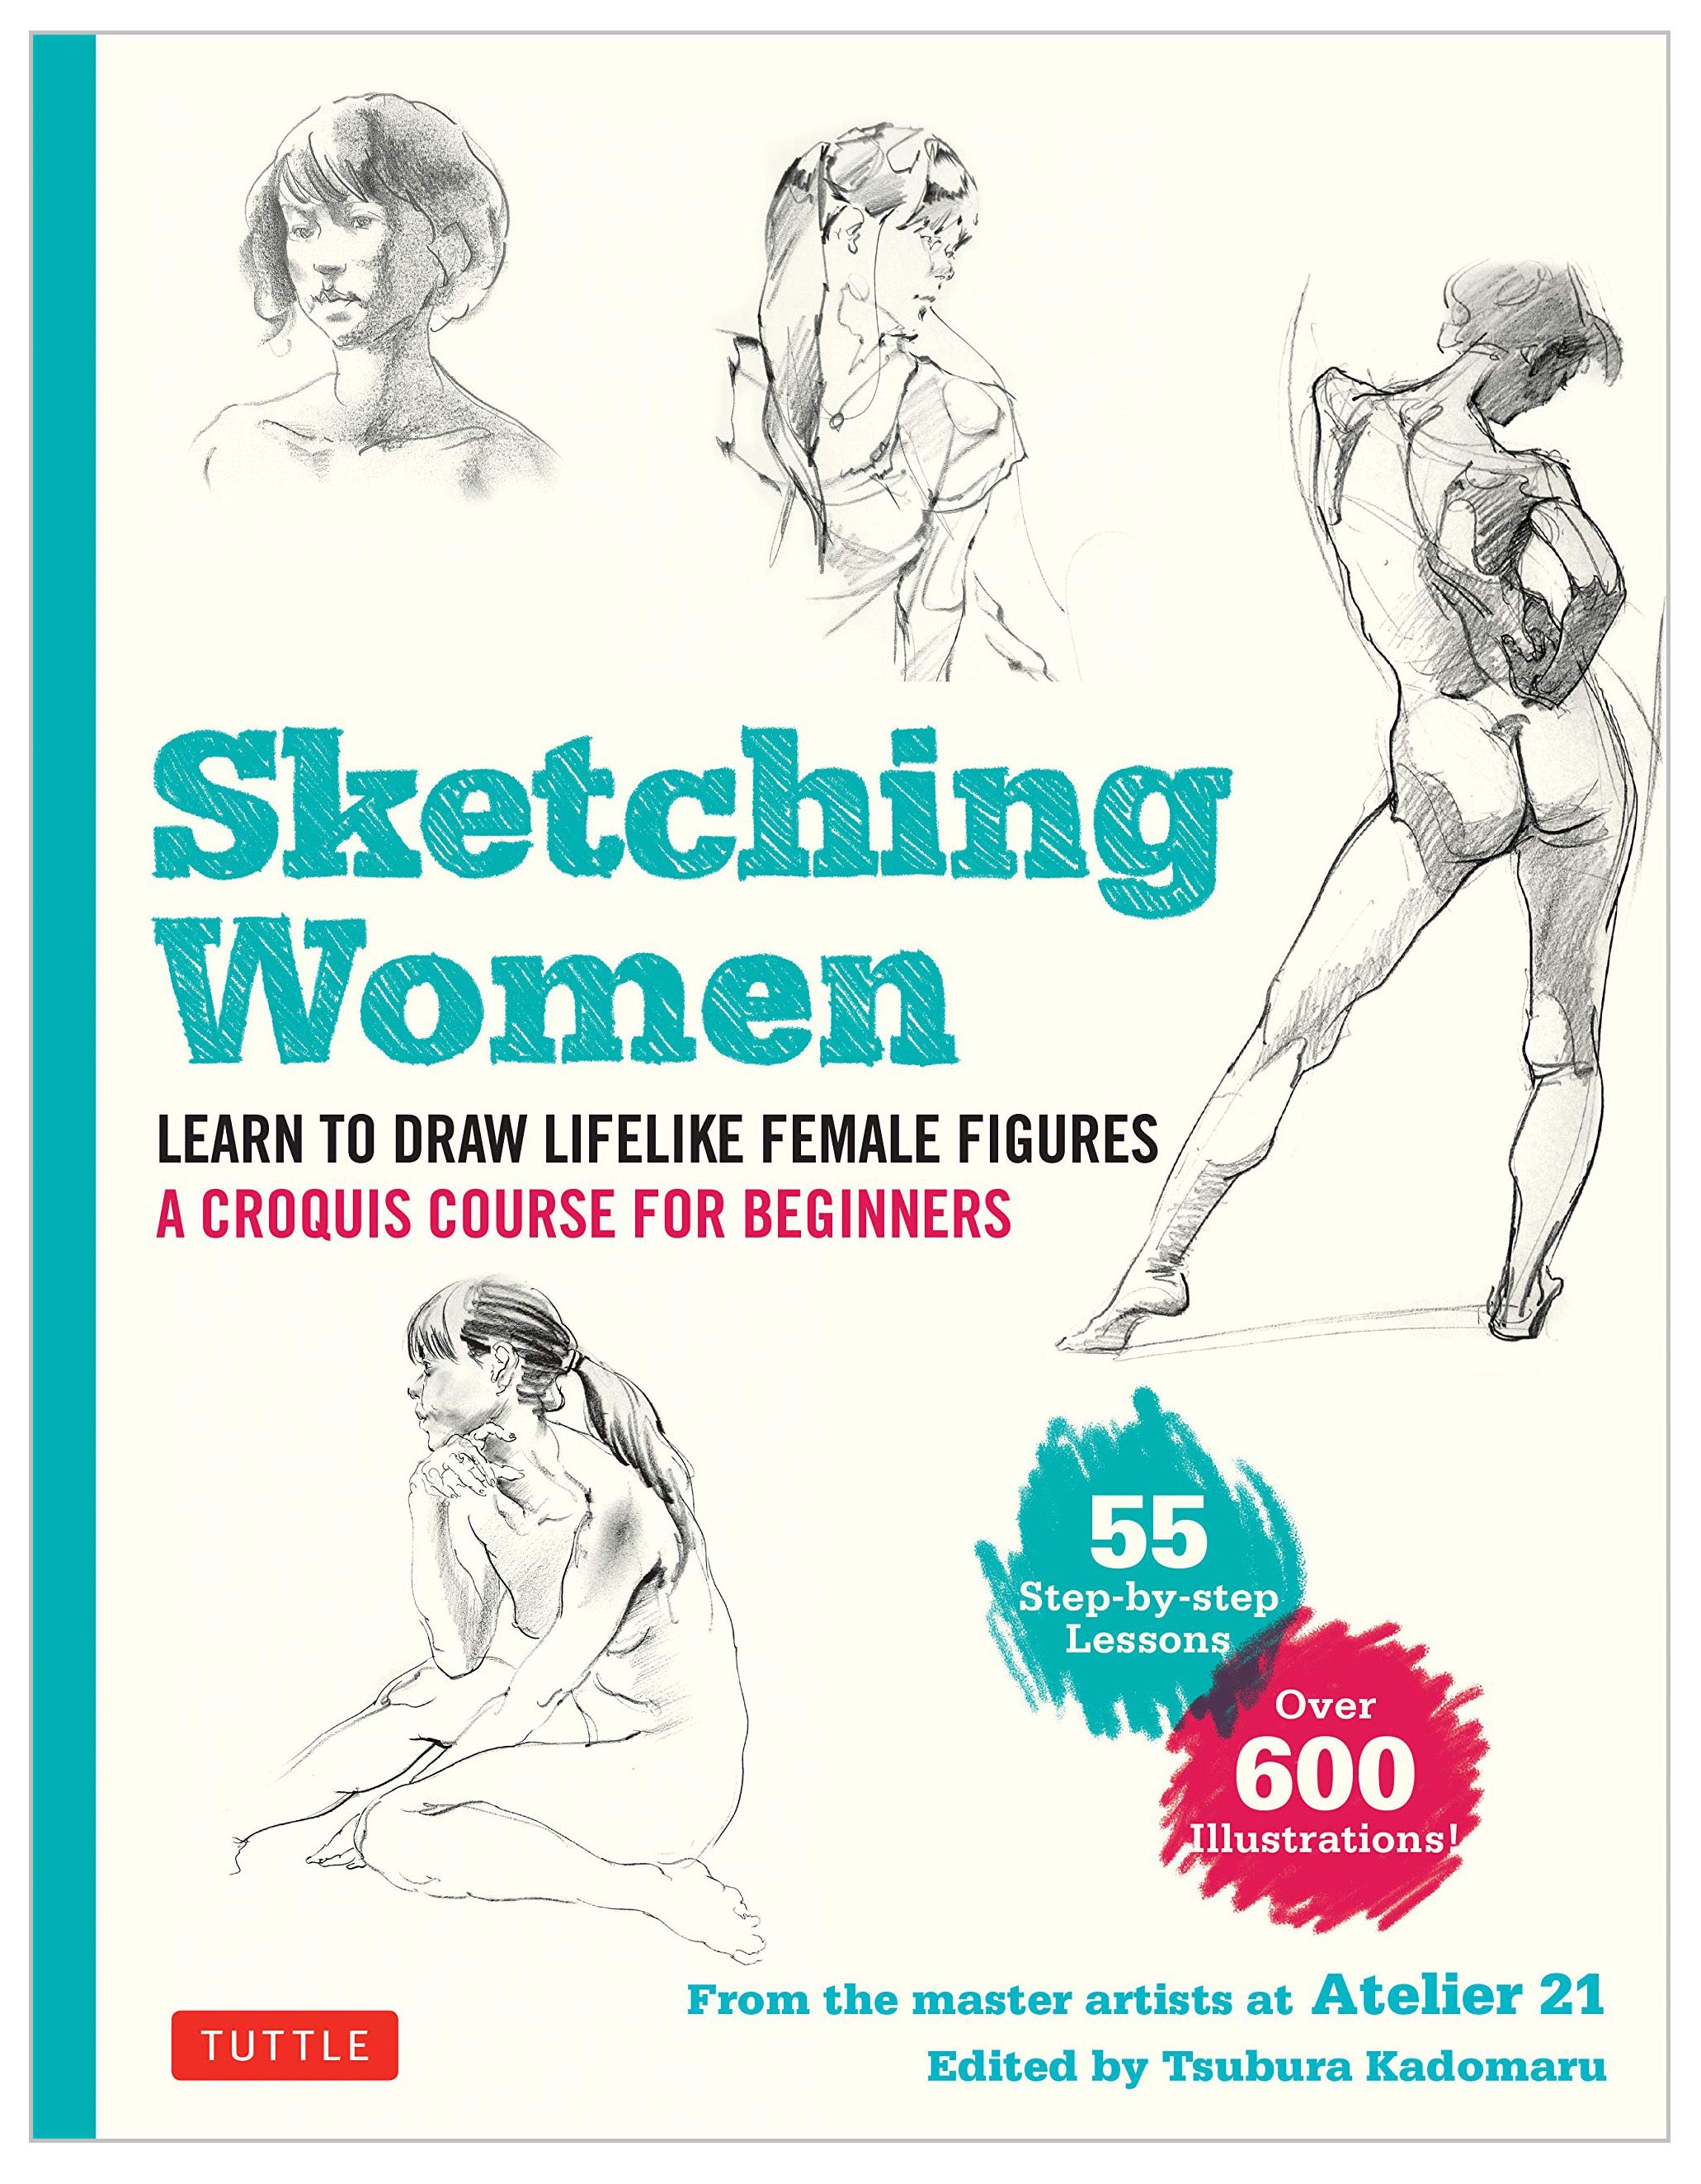 Sketching Women: Learn to Draw Lifelike Female Figures, A Complete Course for Beginners